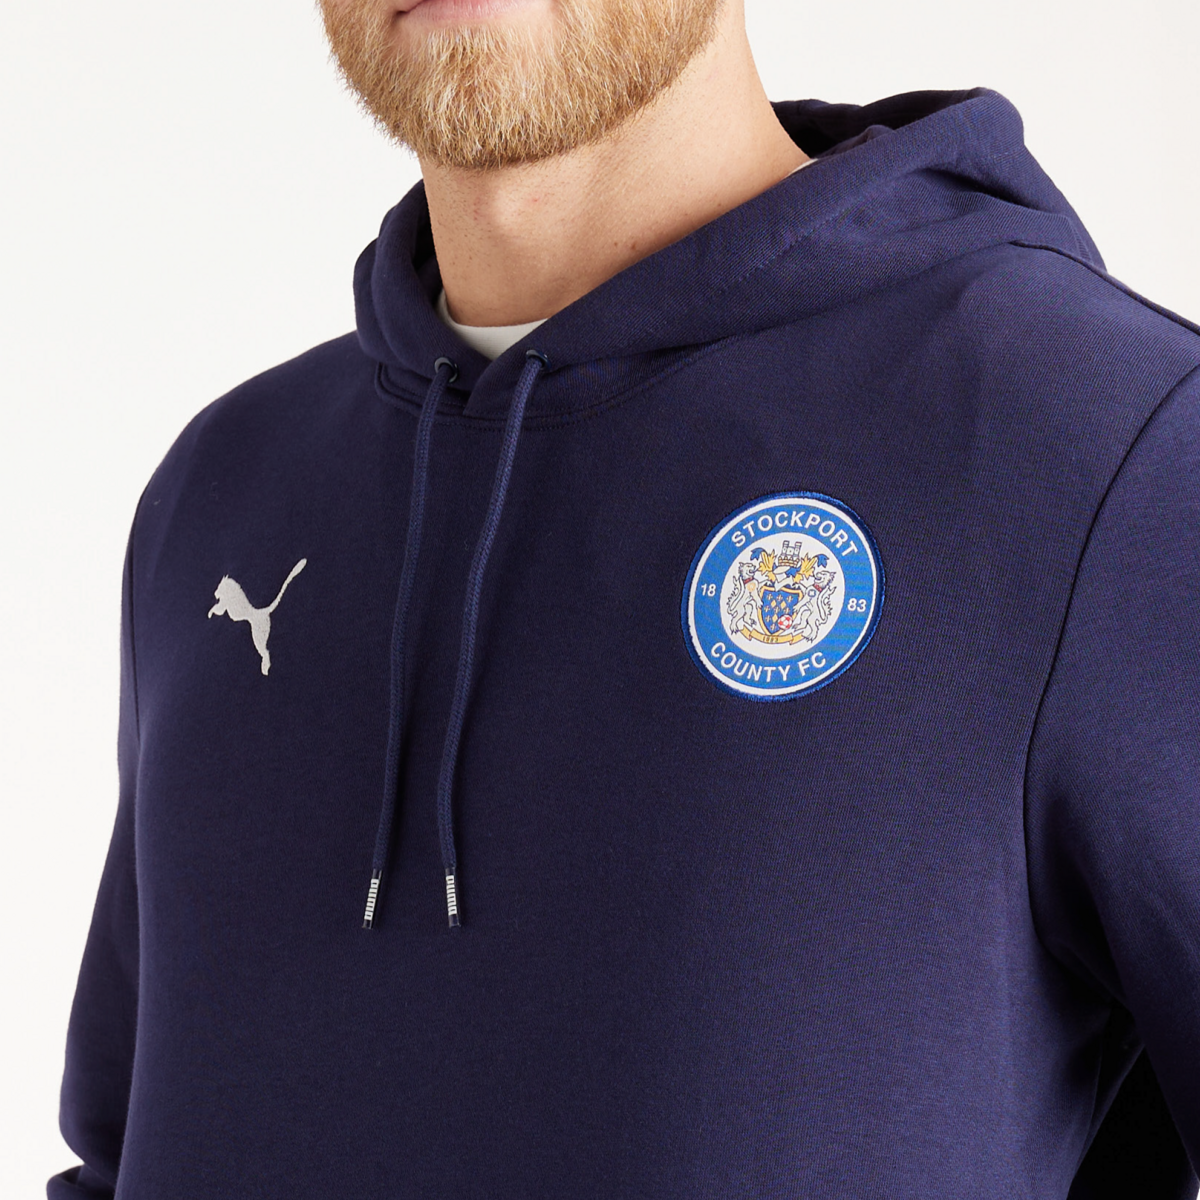 Hoodie Navy - Casual Wear | Stockport County Store